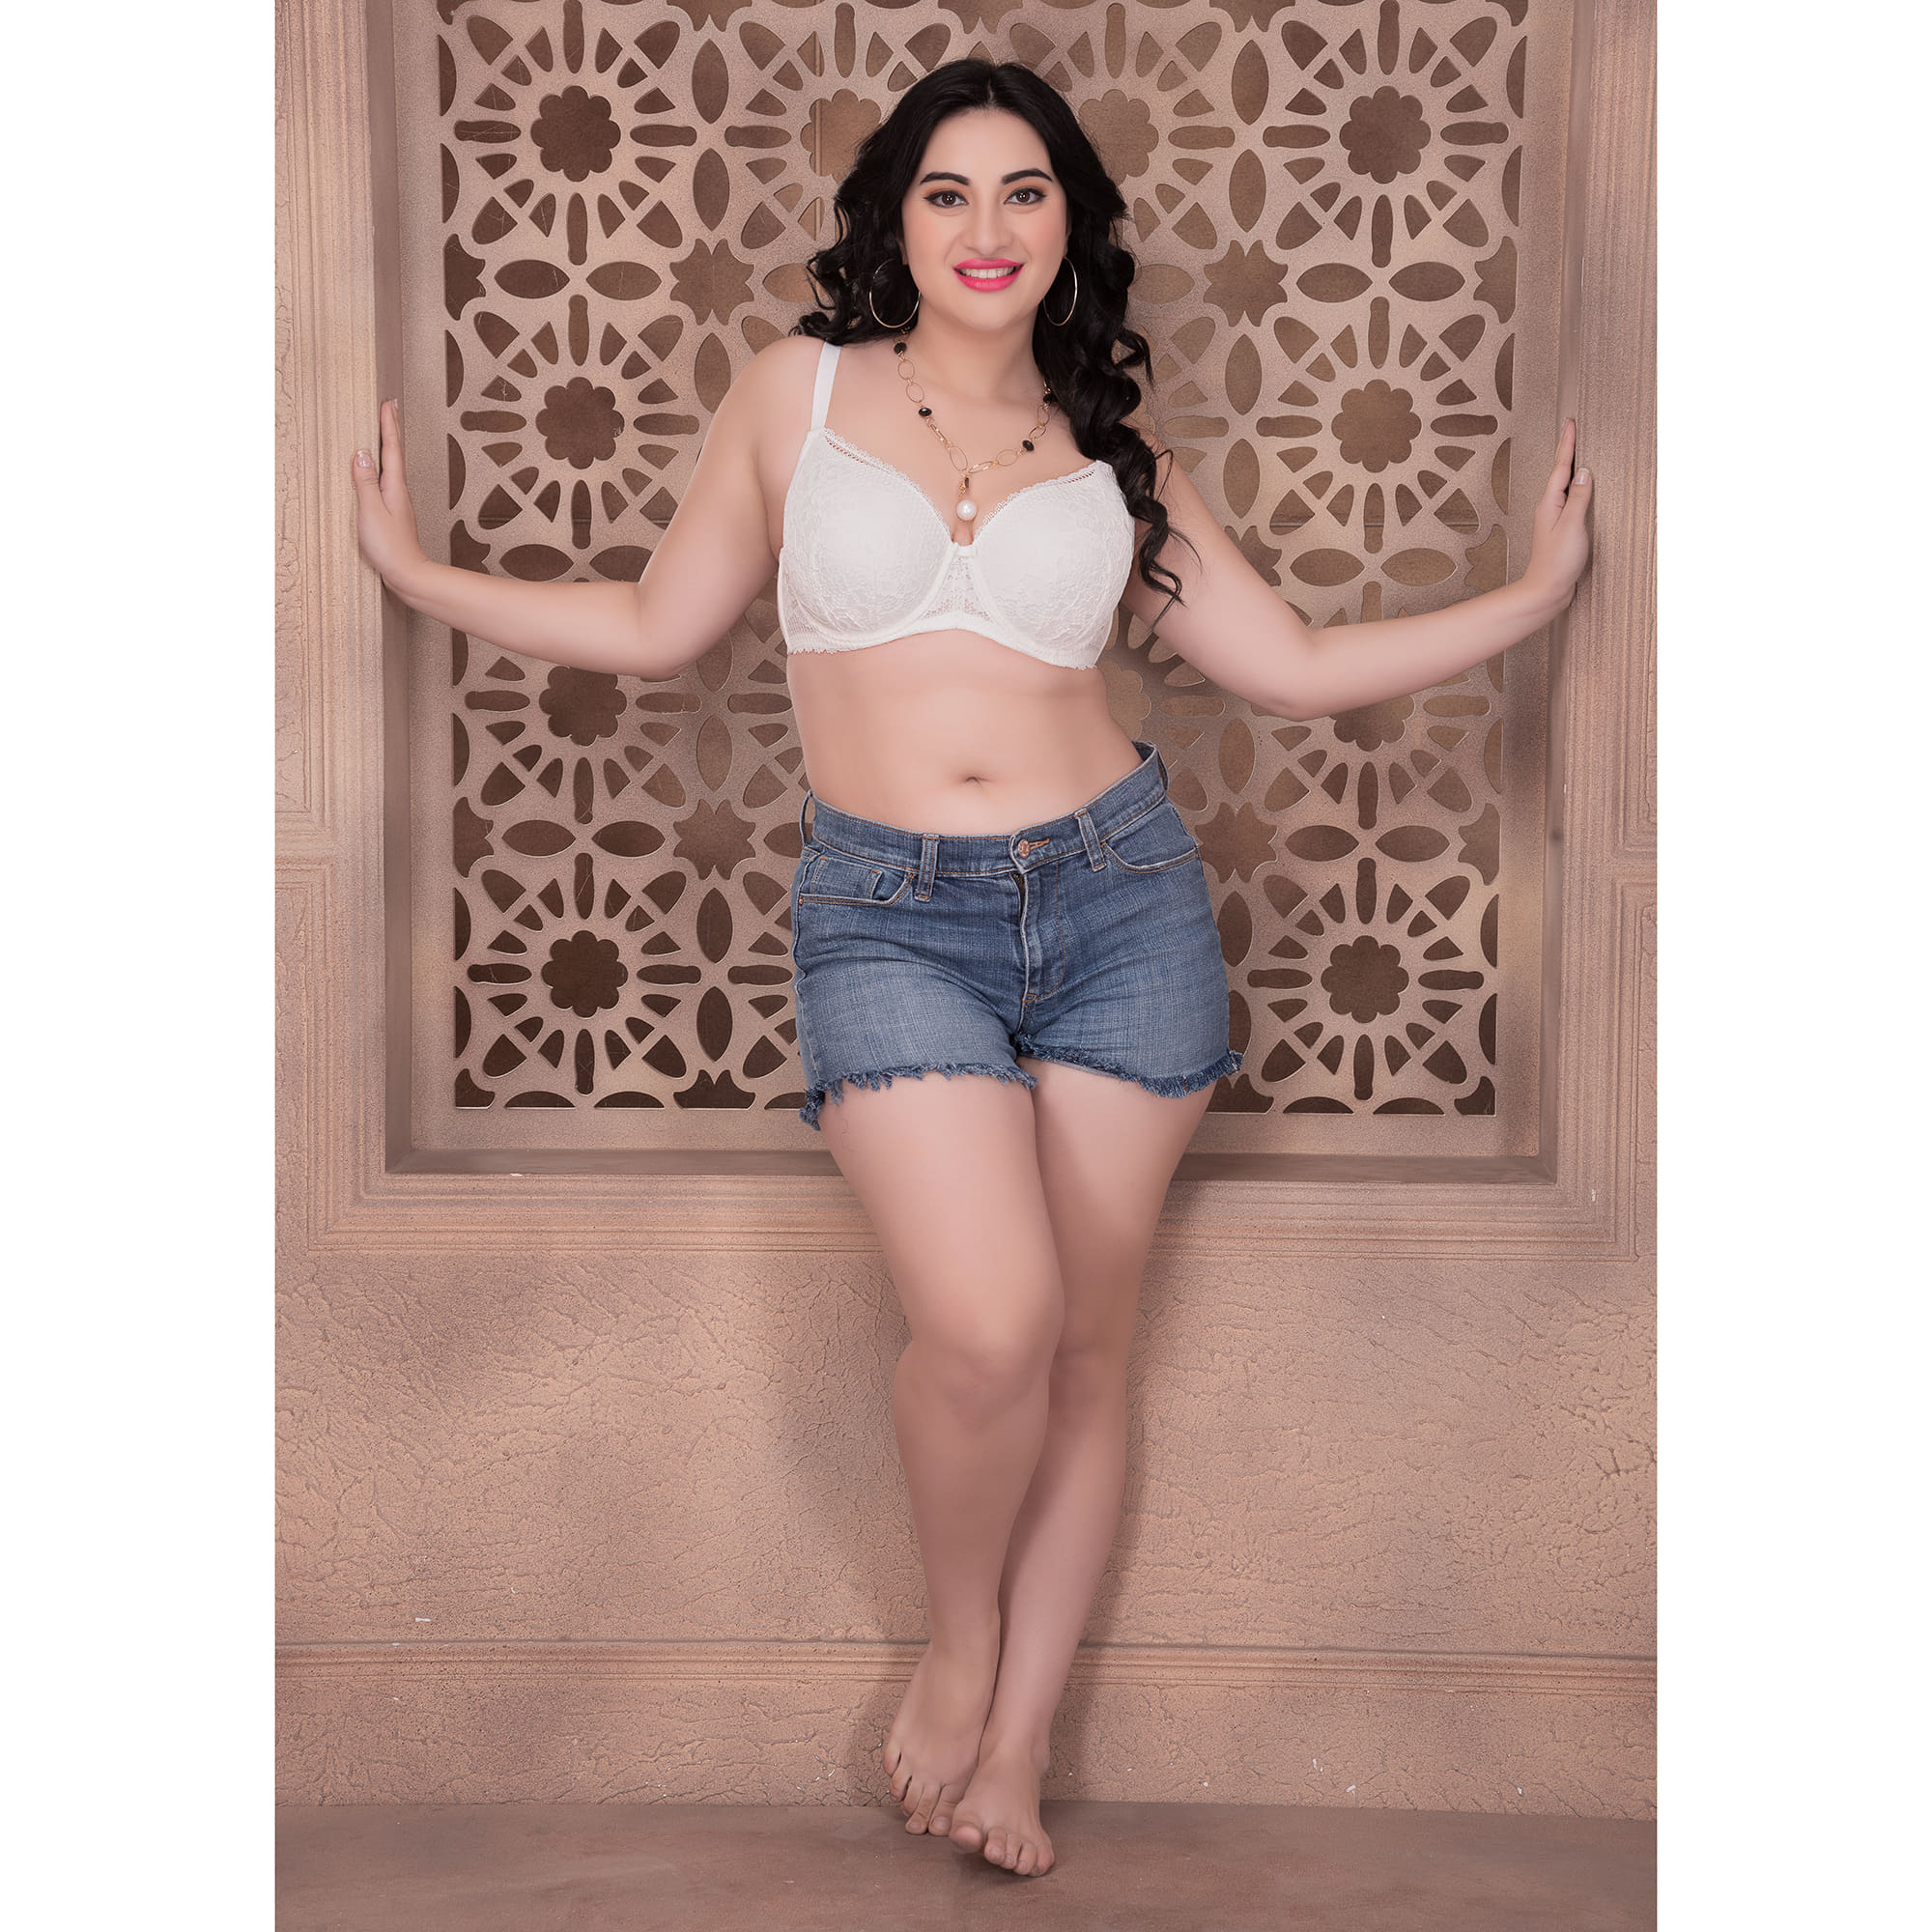 BRADEN butterfly Women Full Coverage Non Padded Bra - Buy BRADEN butterfly  Women Full Coverage Non Padded Bra Online at Best Prices in India